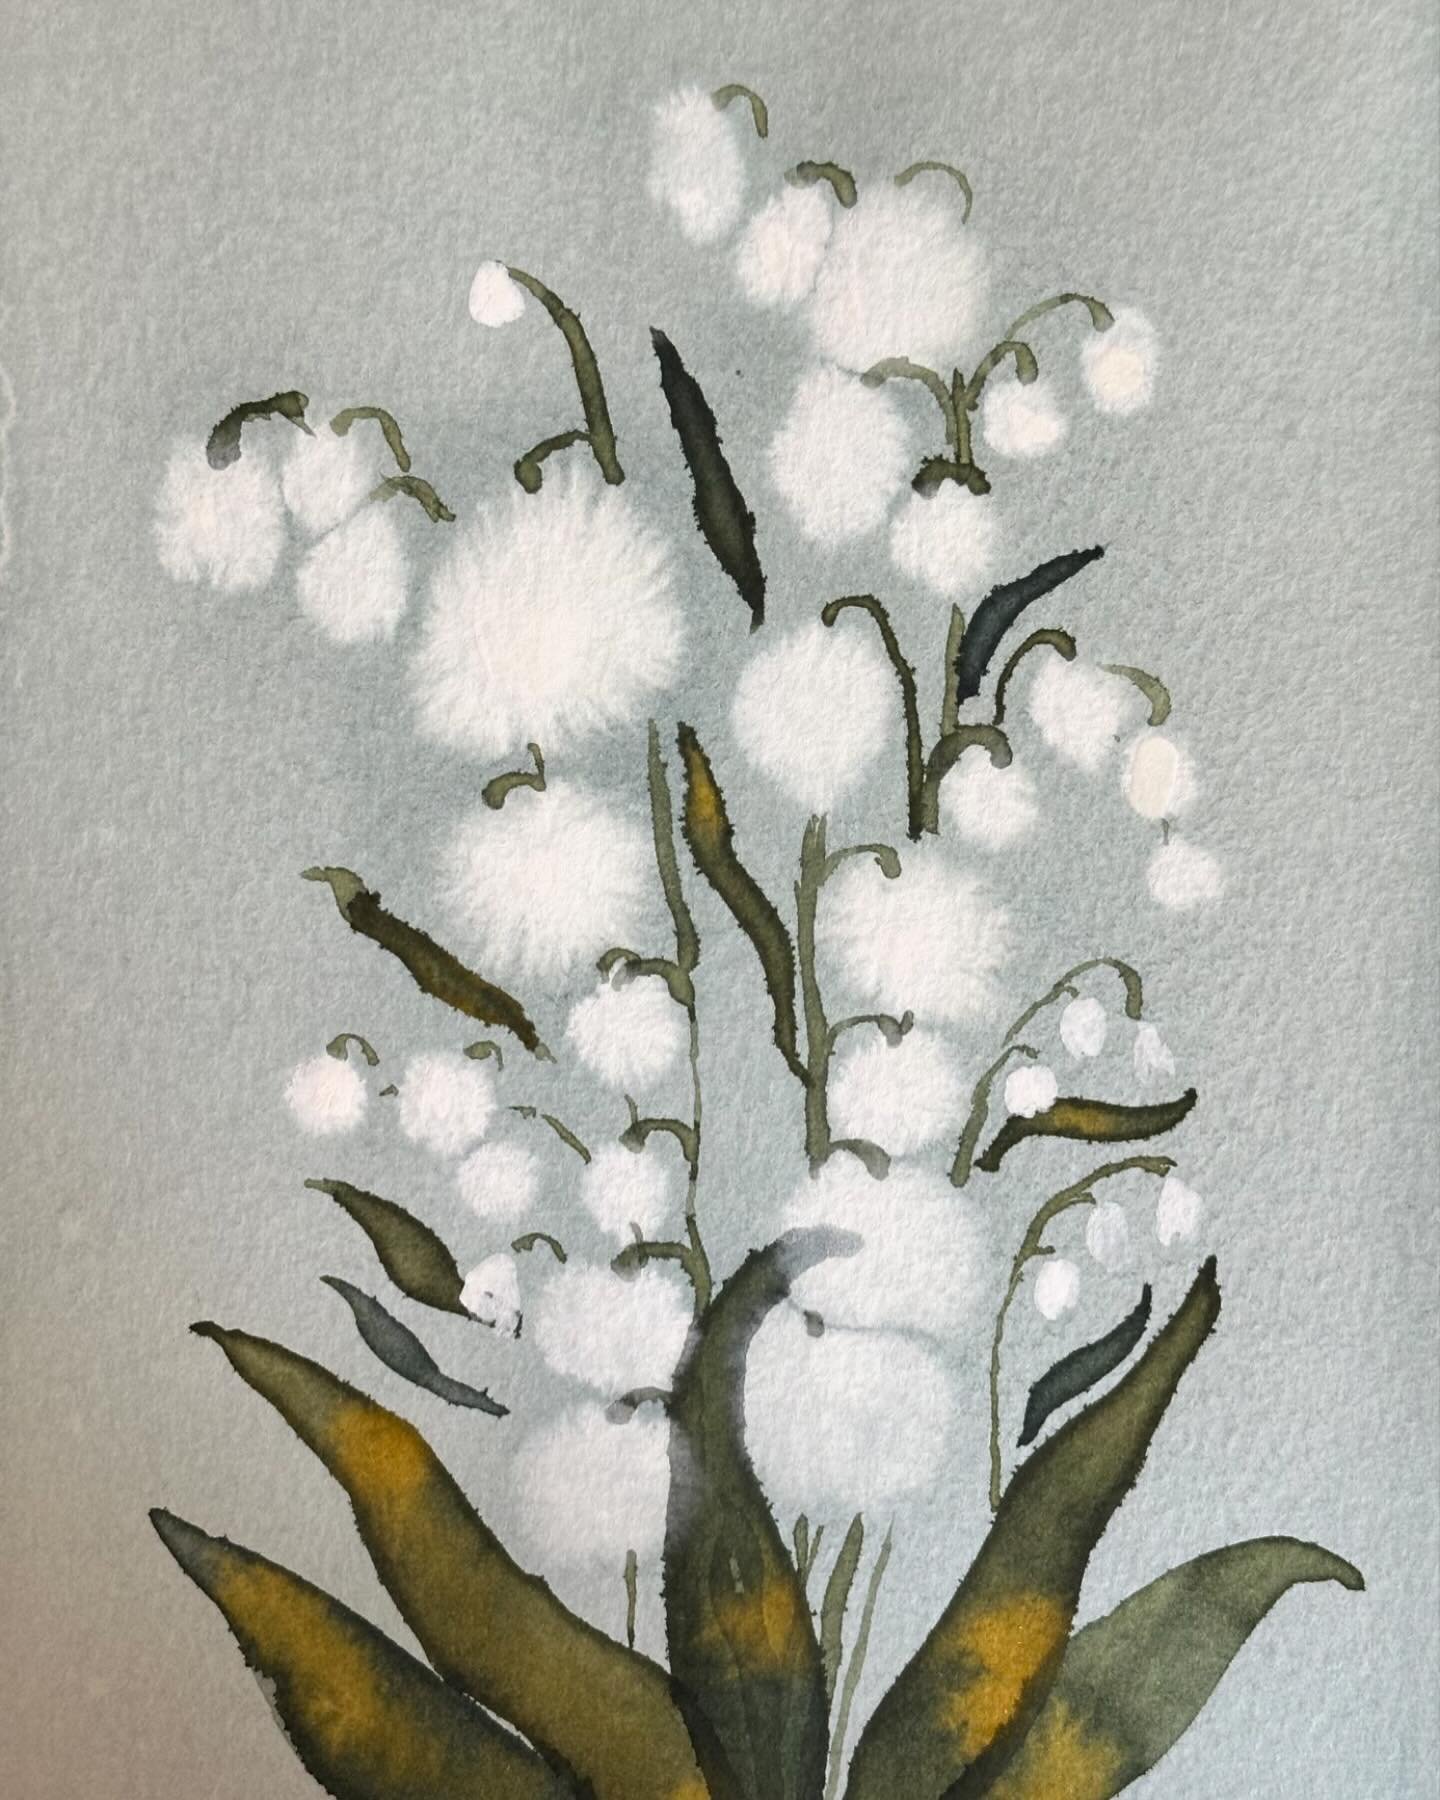 I painted the lily of the valley live tutorial from @sarahdandelioncray. Some of my white spots got a little out of hand and large and fuzzy so maybe not super true to actual lily of the valley but they still turned out pretty. I love the background 